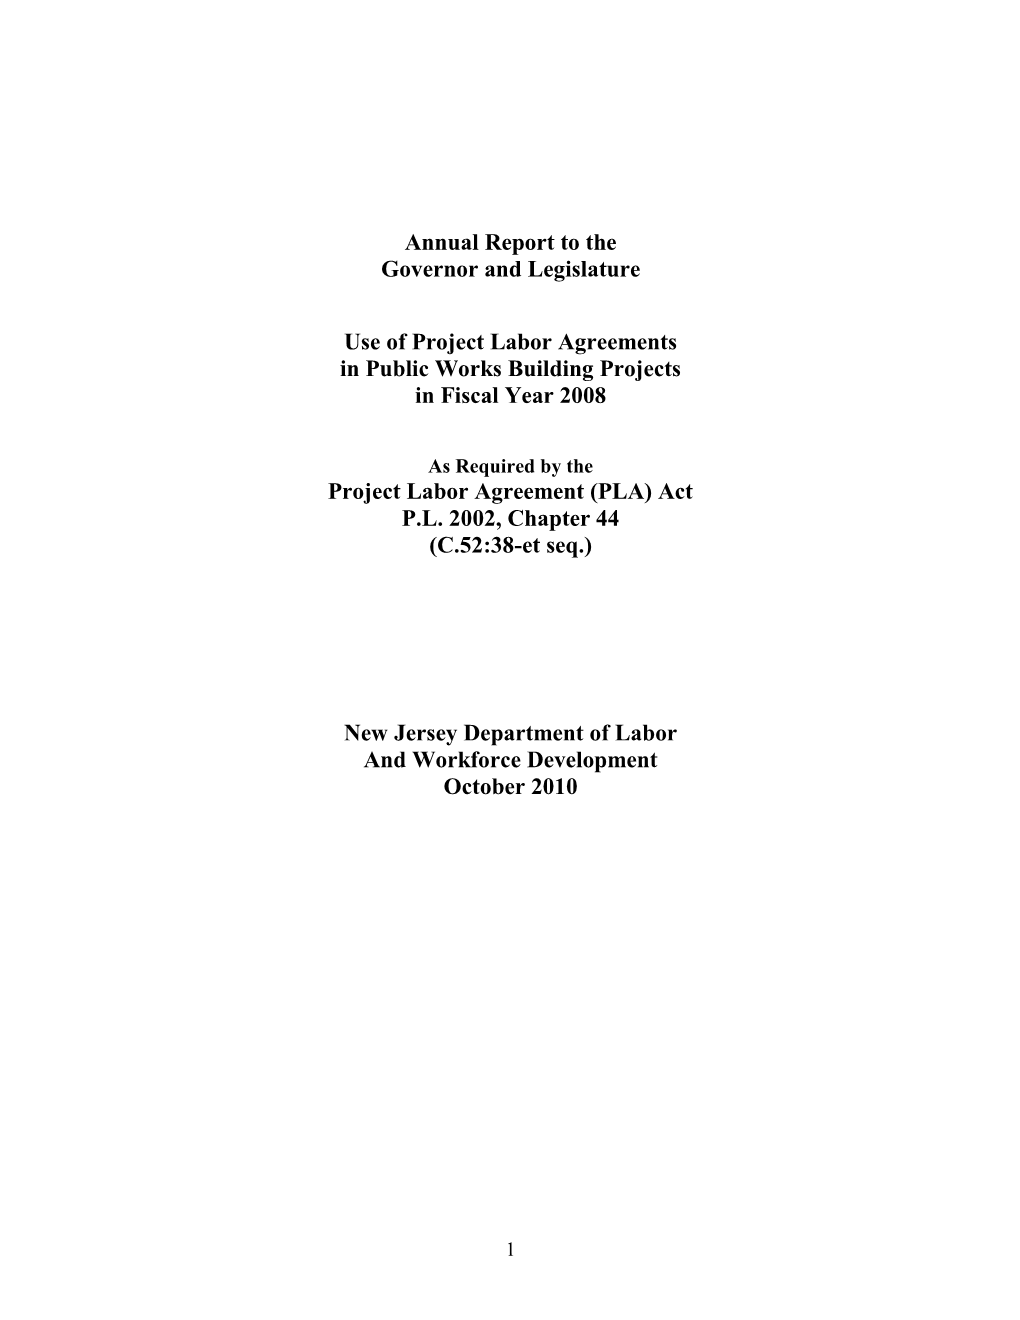 Annual Report to the Governor and Legislature Use of Project Labor